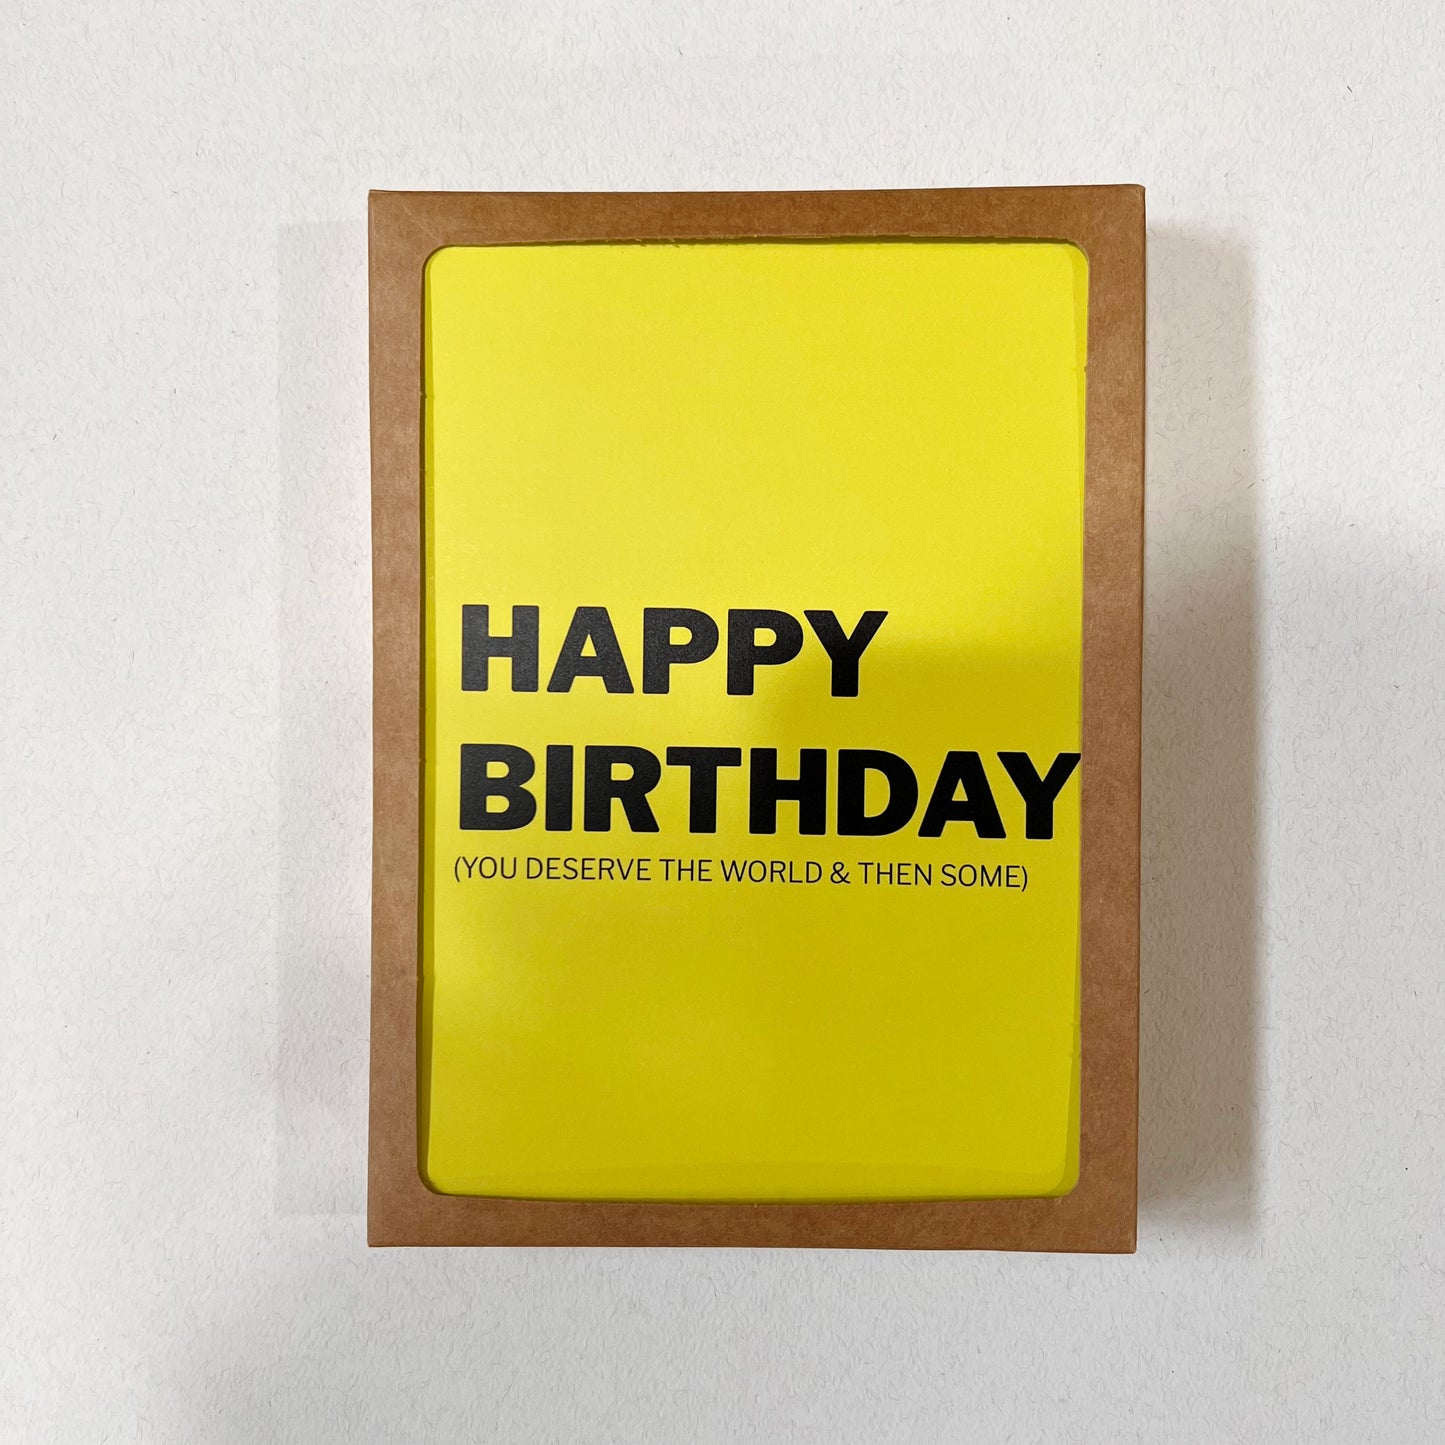 You Deserve 5x7” simple yellow birthday greeting card from Goods Made By Digitrillnana, Ashley Fletcher. Black Woman Owned. Perfect card to celebrate a birthday, or add to a gift!